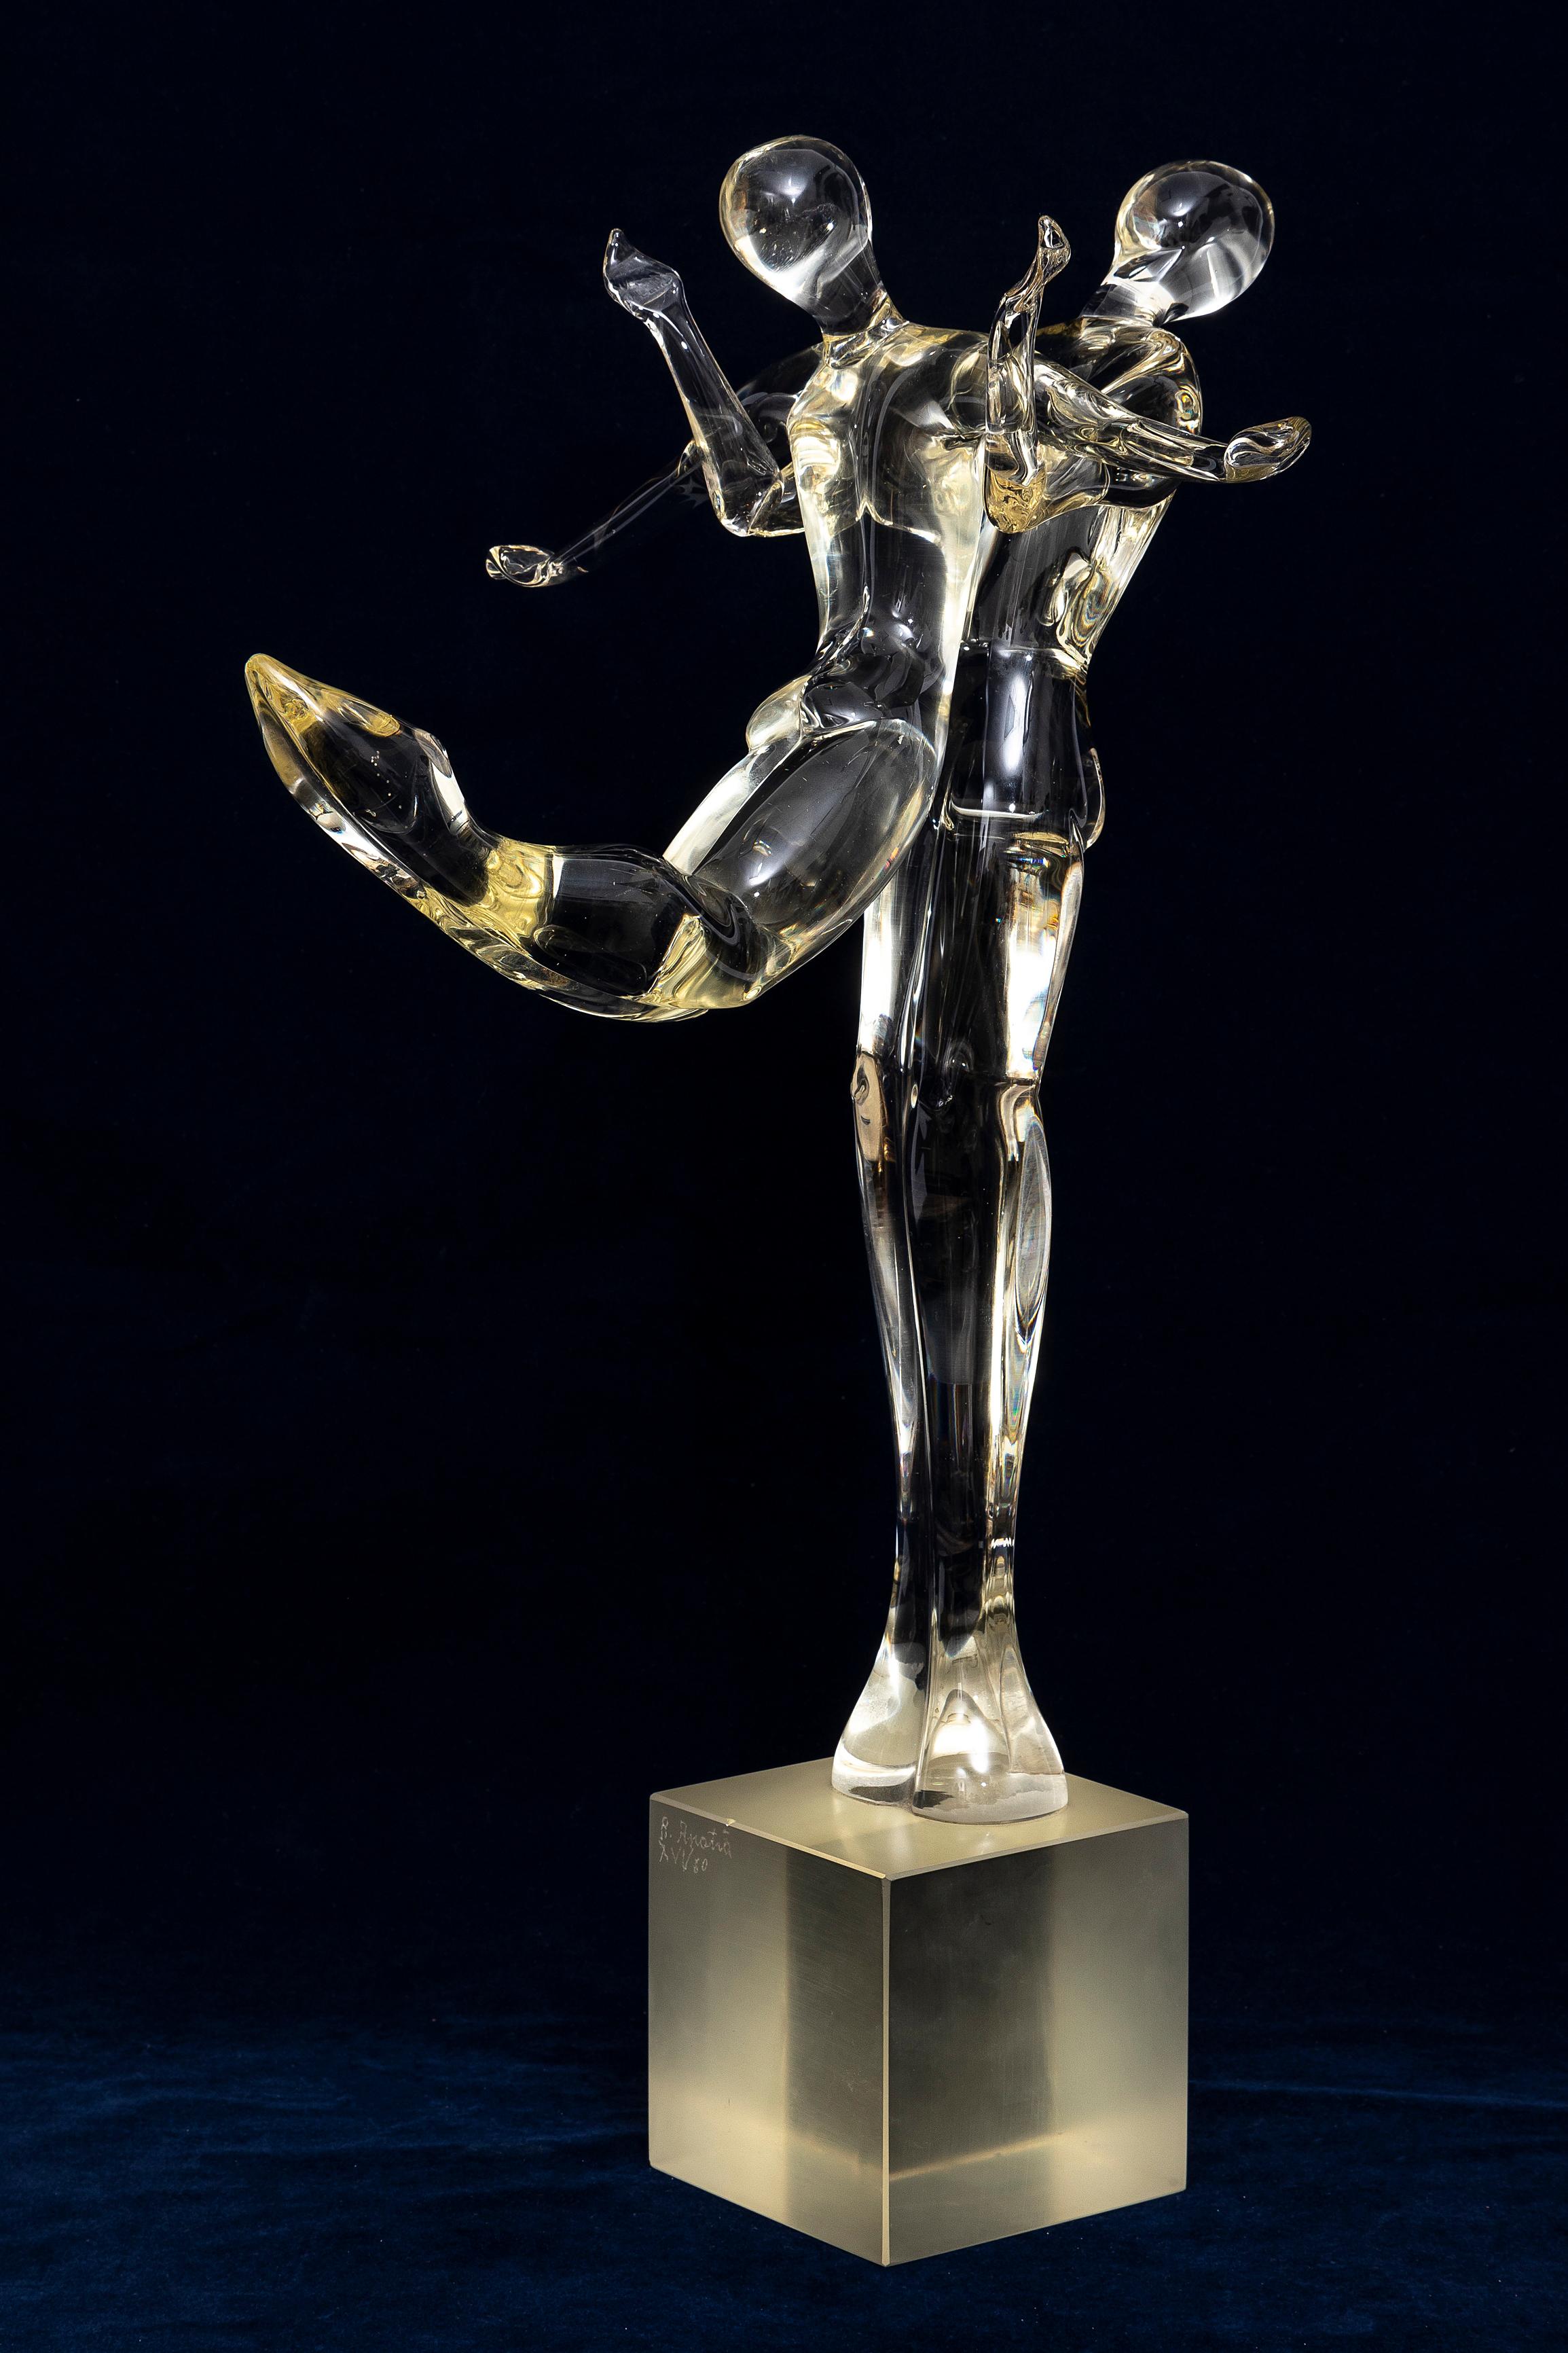 Italian A Two-piece Renato Anatra Gymnast Dancer Sculpture by Murano Art Glass, Signed For Sale